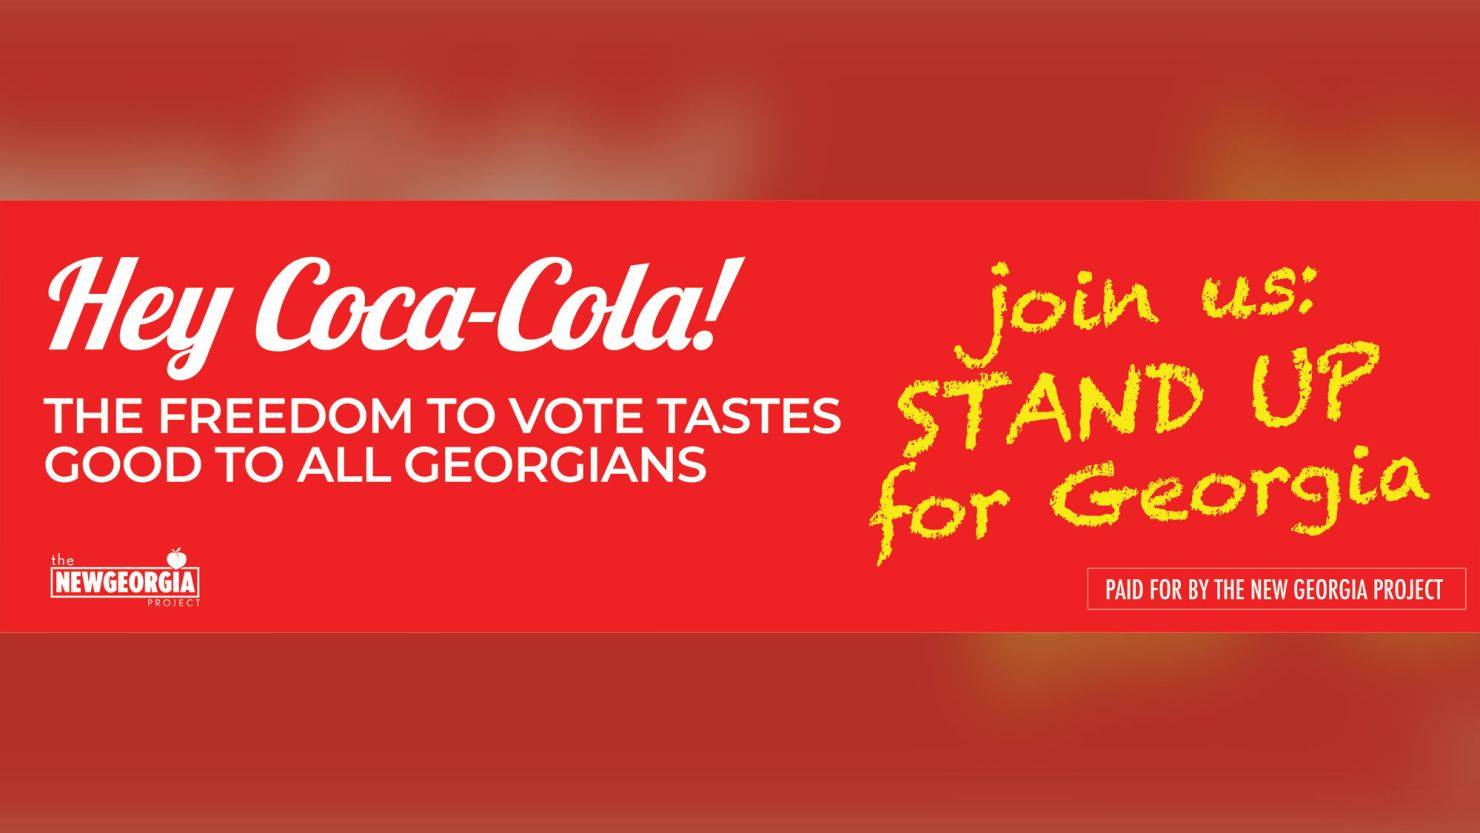 Groups in Georgia are launching a new campaign urging Cola-Cola and other corporations to oppose legislation that would curb access to voting.